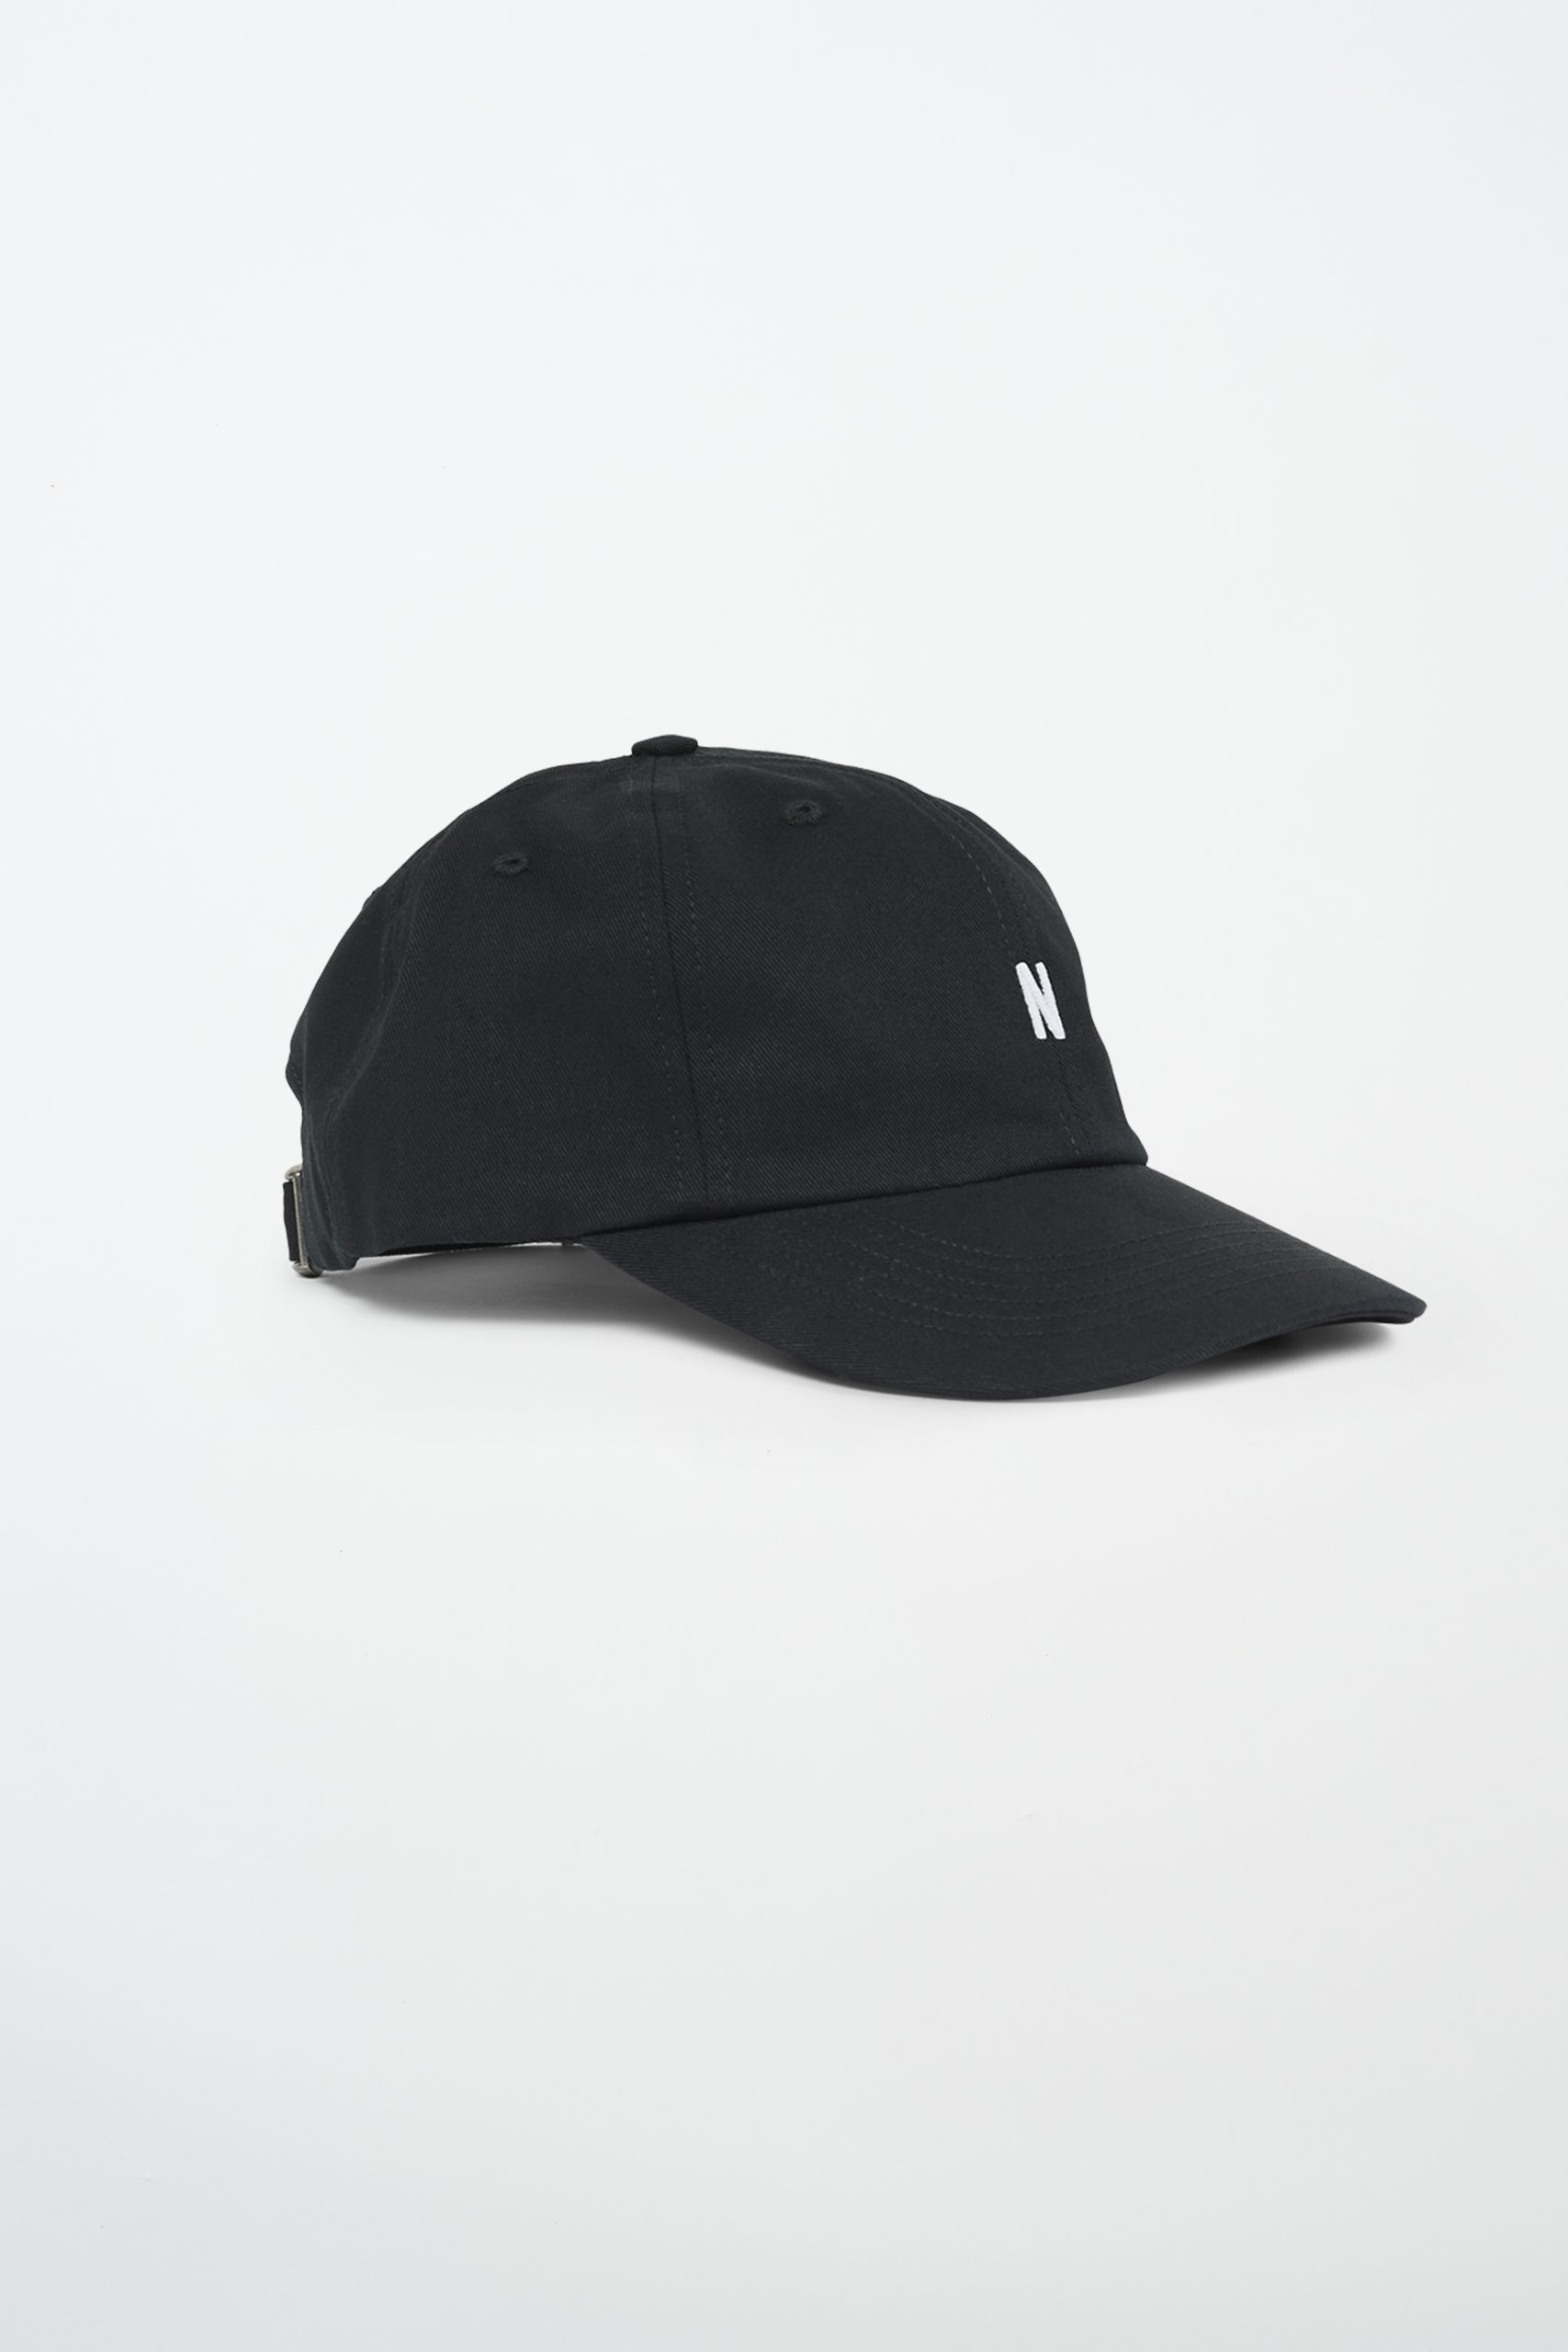 NORSE PROJECTS TWILL Sports cap Black